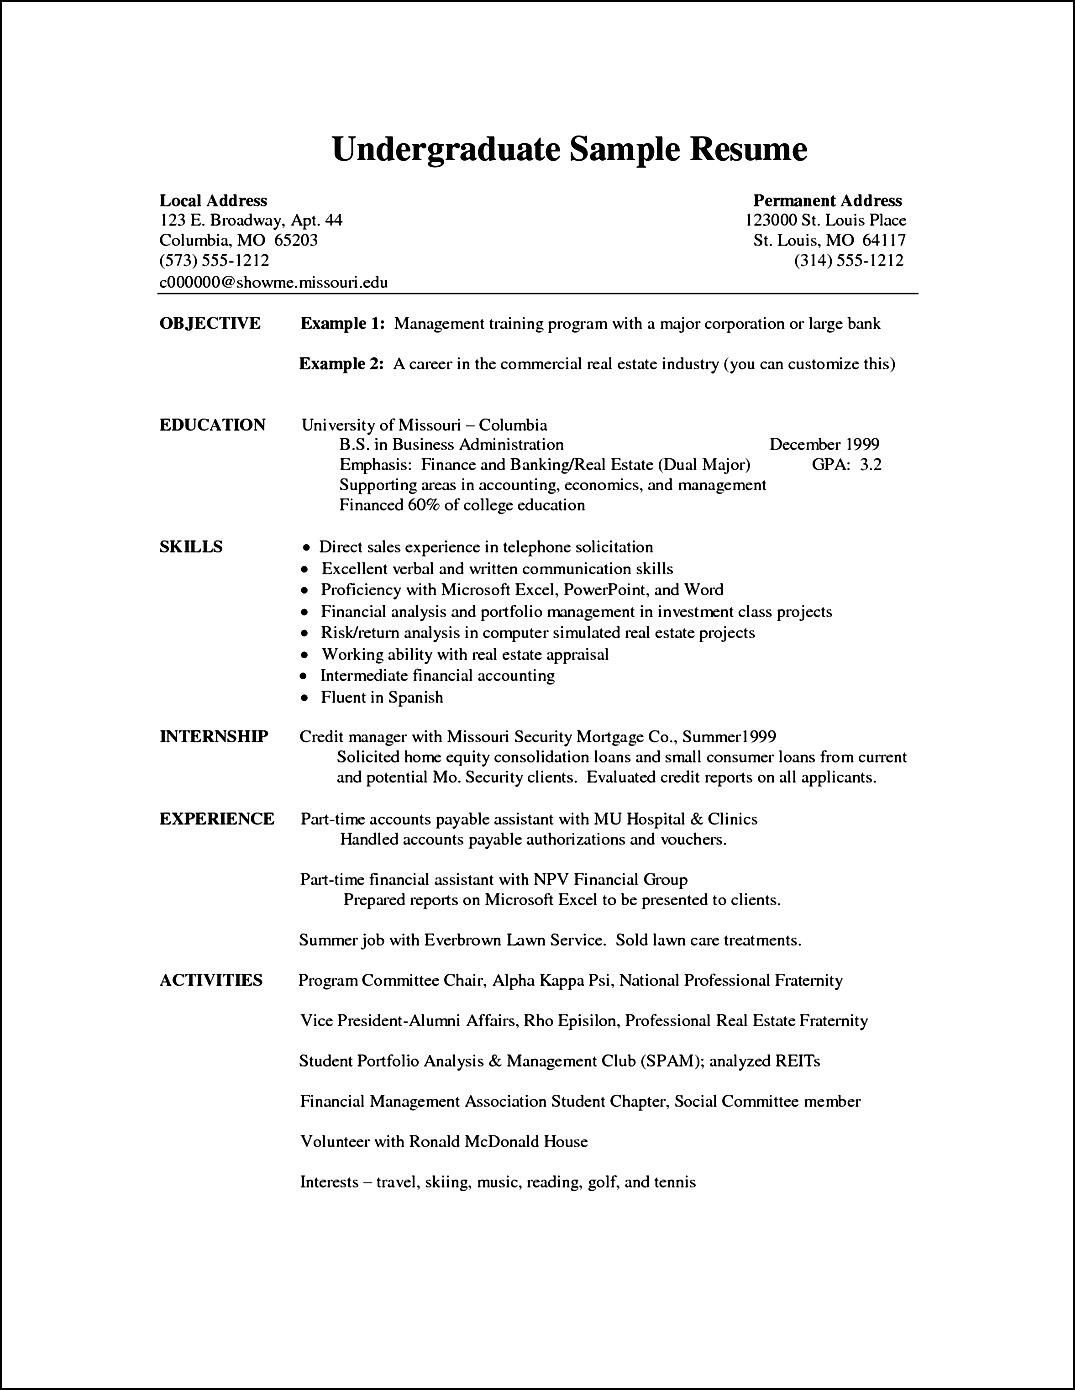 Resume Format Undergraduate Cv Examples Resume Format intended for size 1075 X 1390